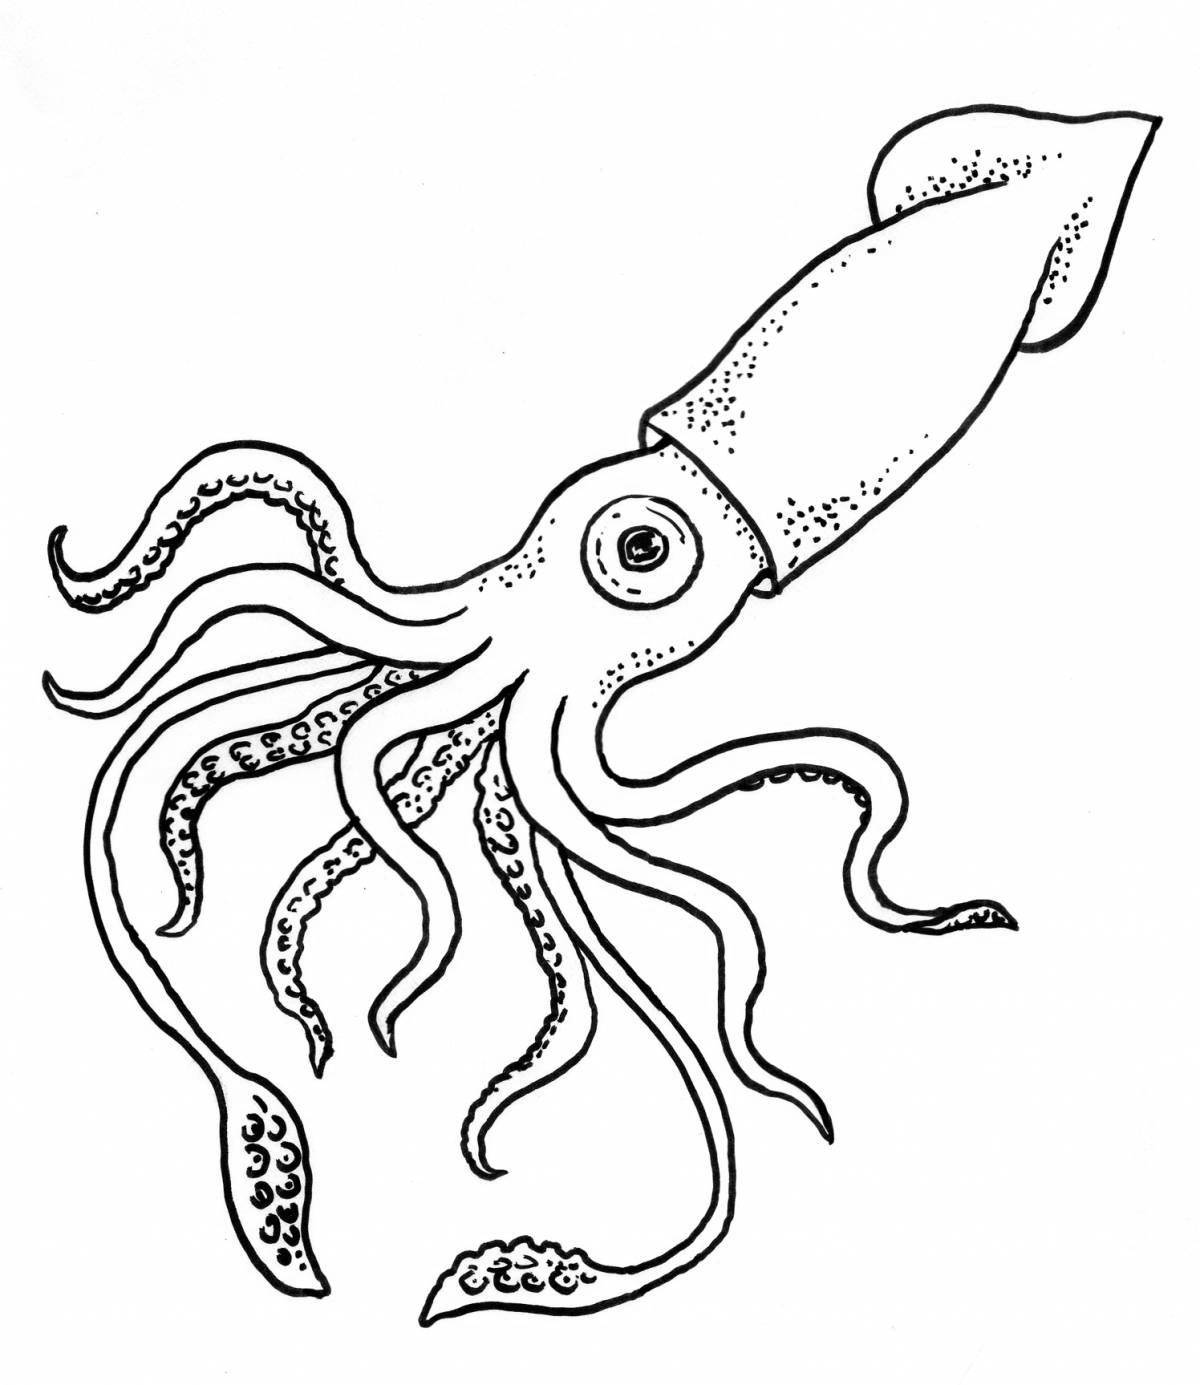 Cuttlefish coloring page